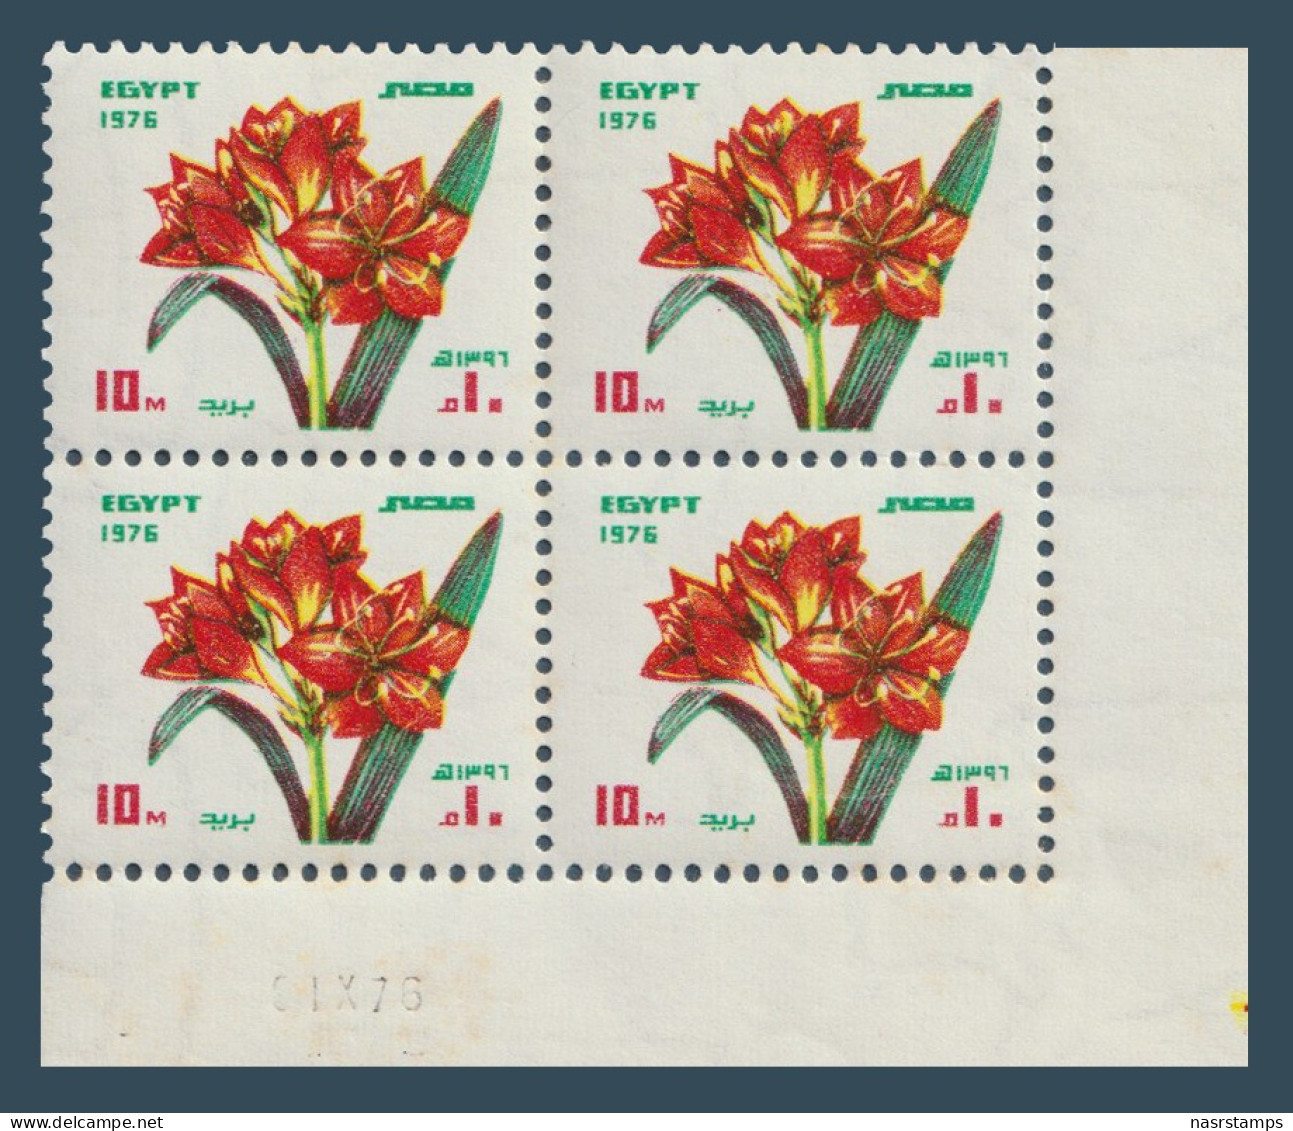 Egypt - 1976 - ( Flowers - Scarborough Lily - For Use On Greeting Cards ) - MNH (**) - Ungebraucht